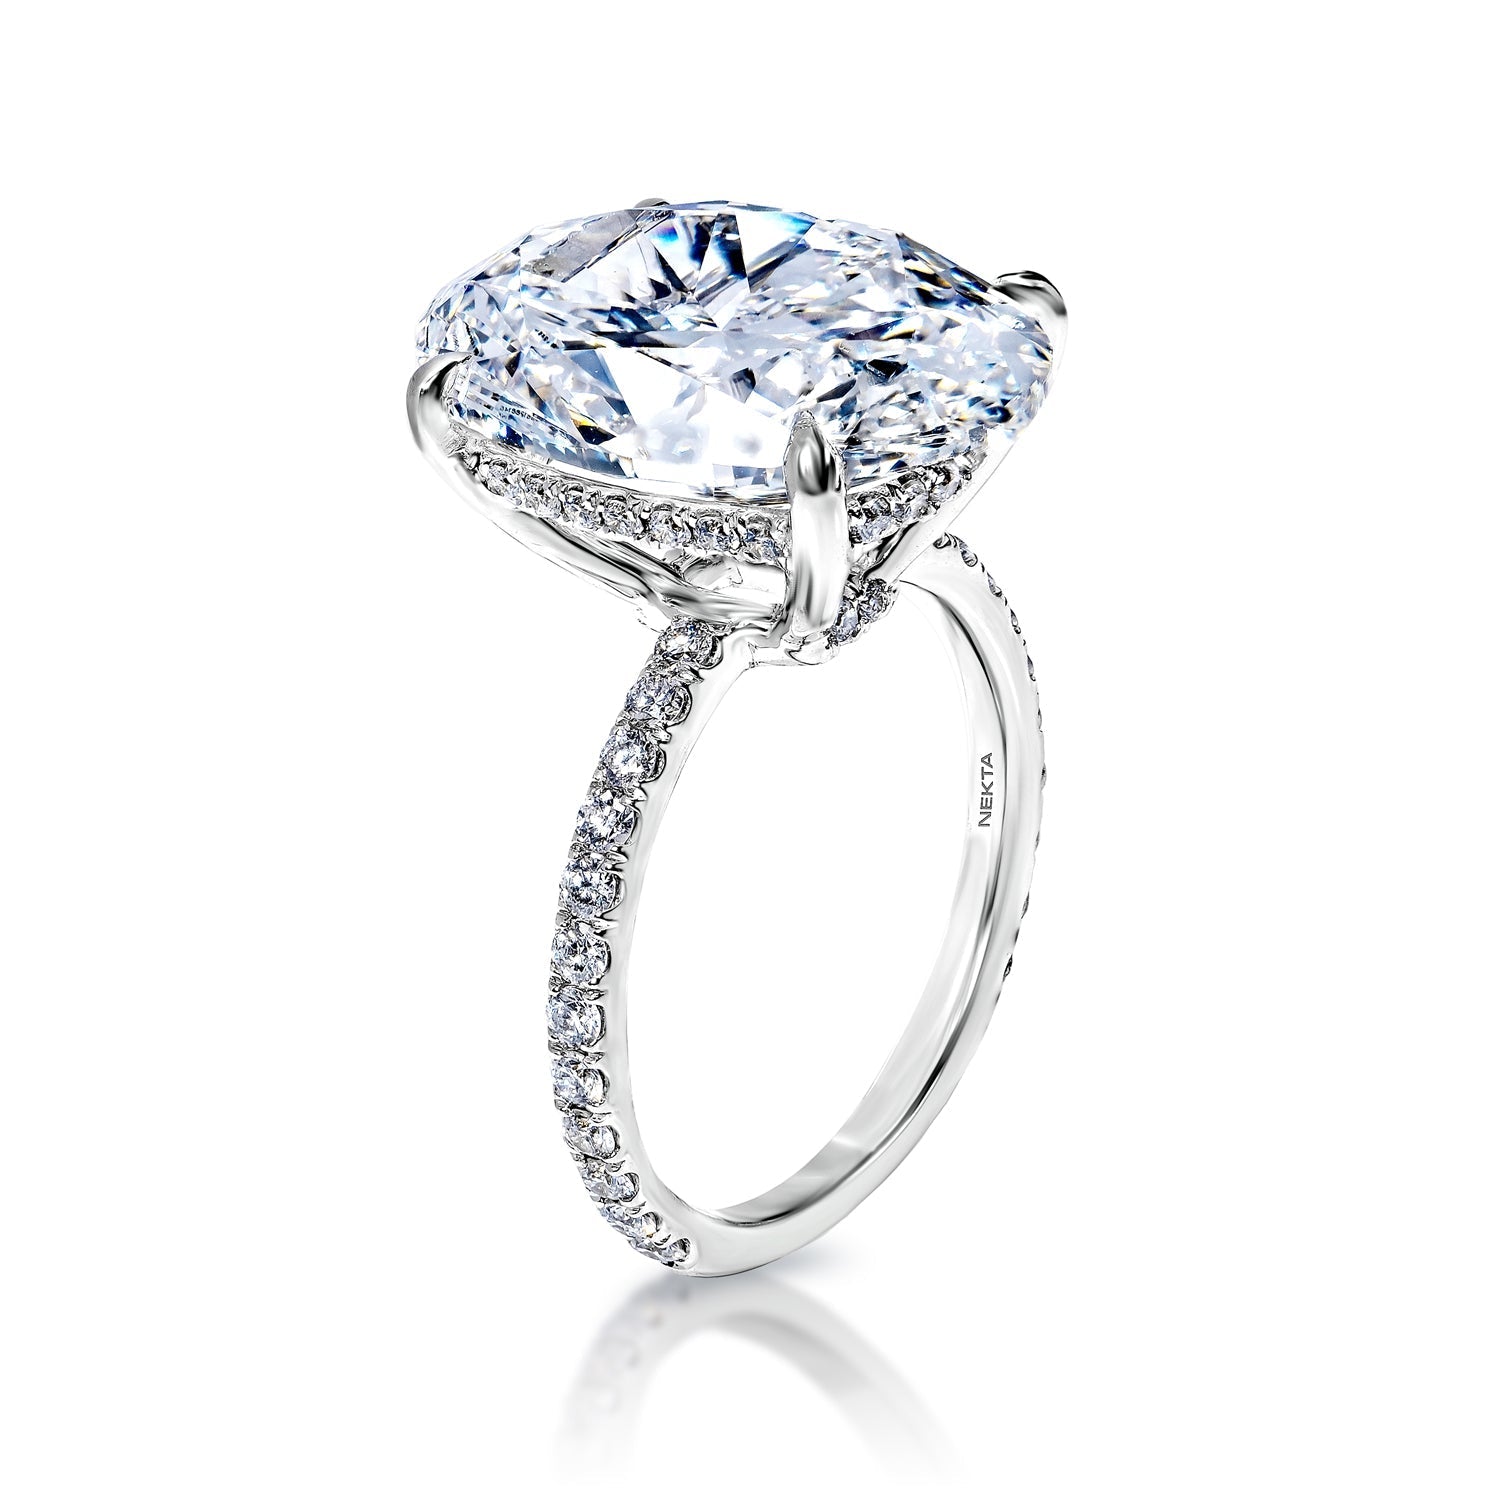 Lurene 11 Carat F VS1 Oval Cut Lab Grown Diamond Engagement Ring in 18k White Gold. Side View